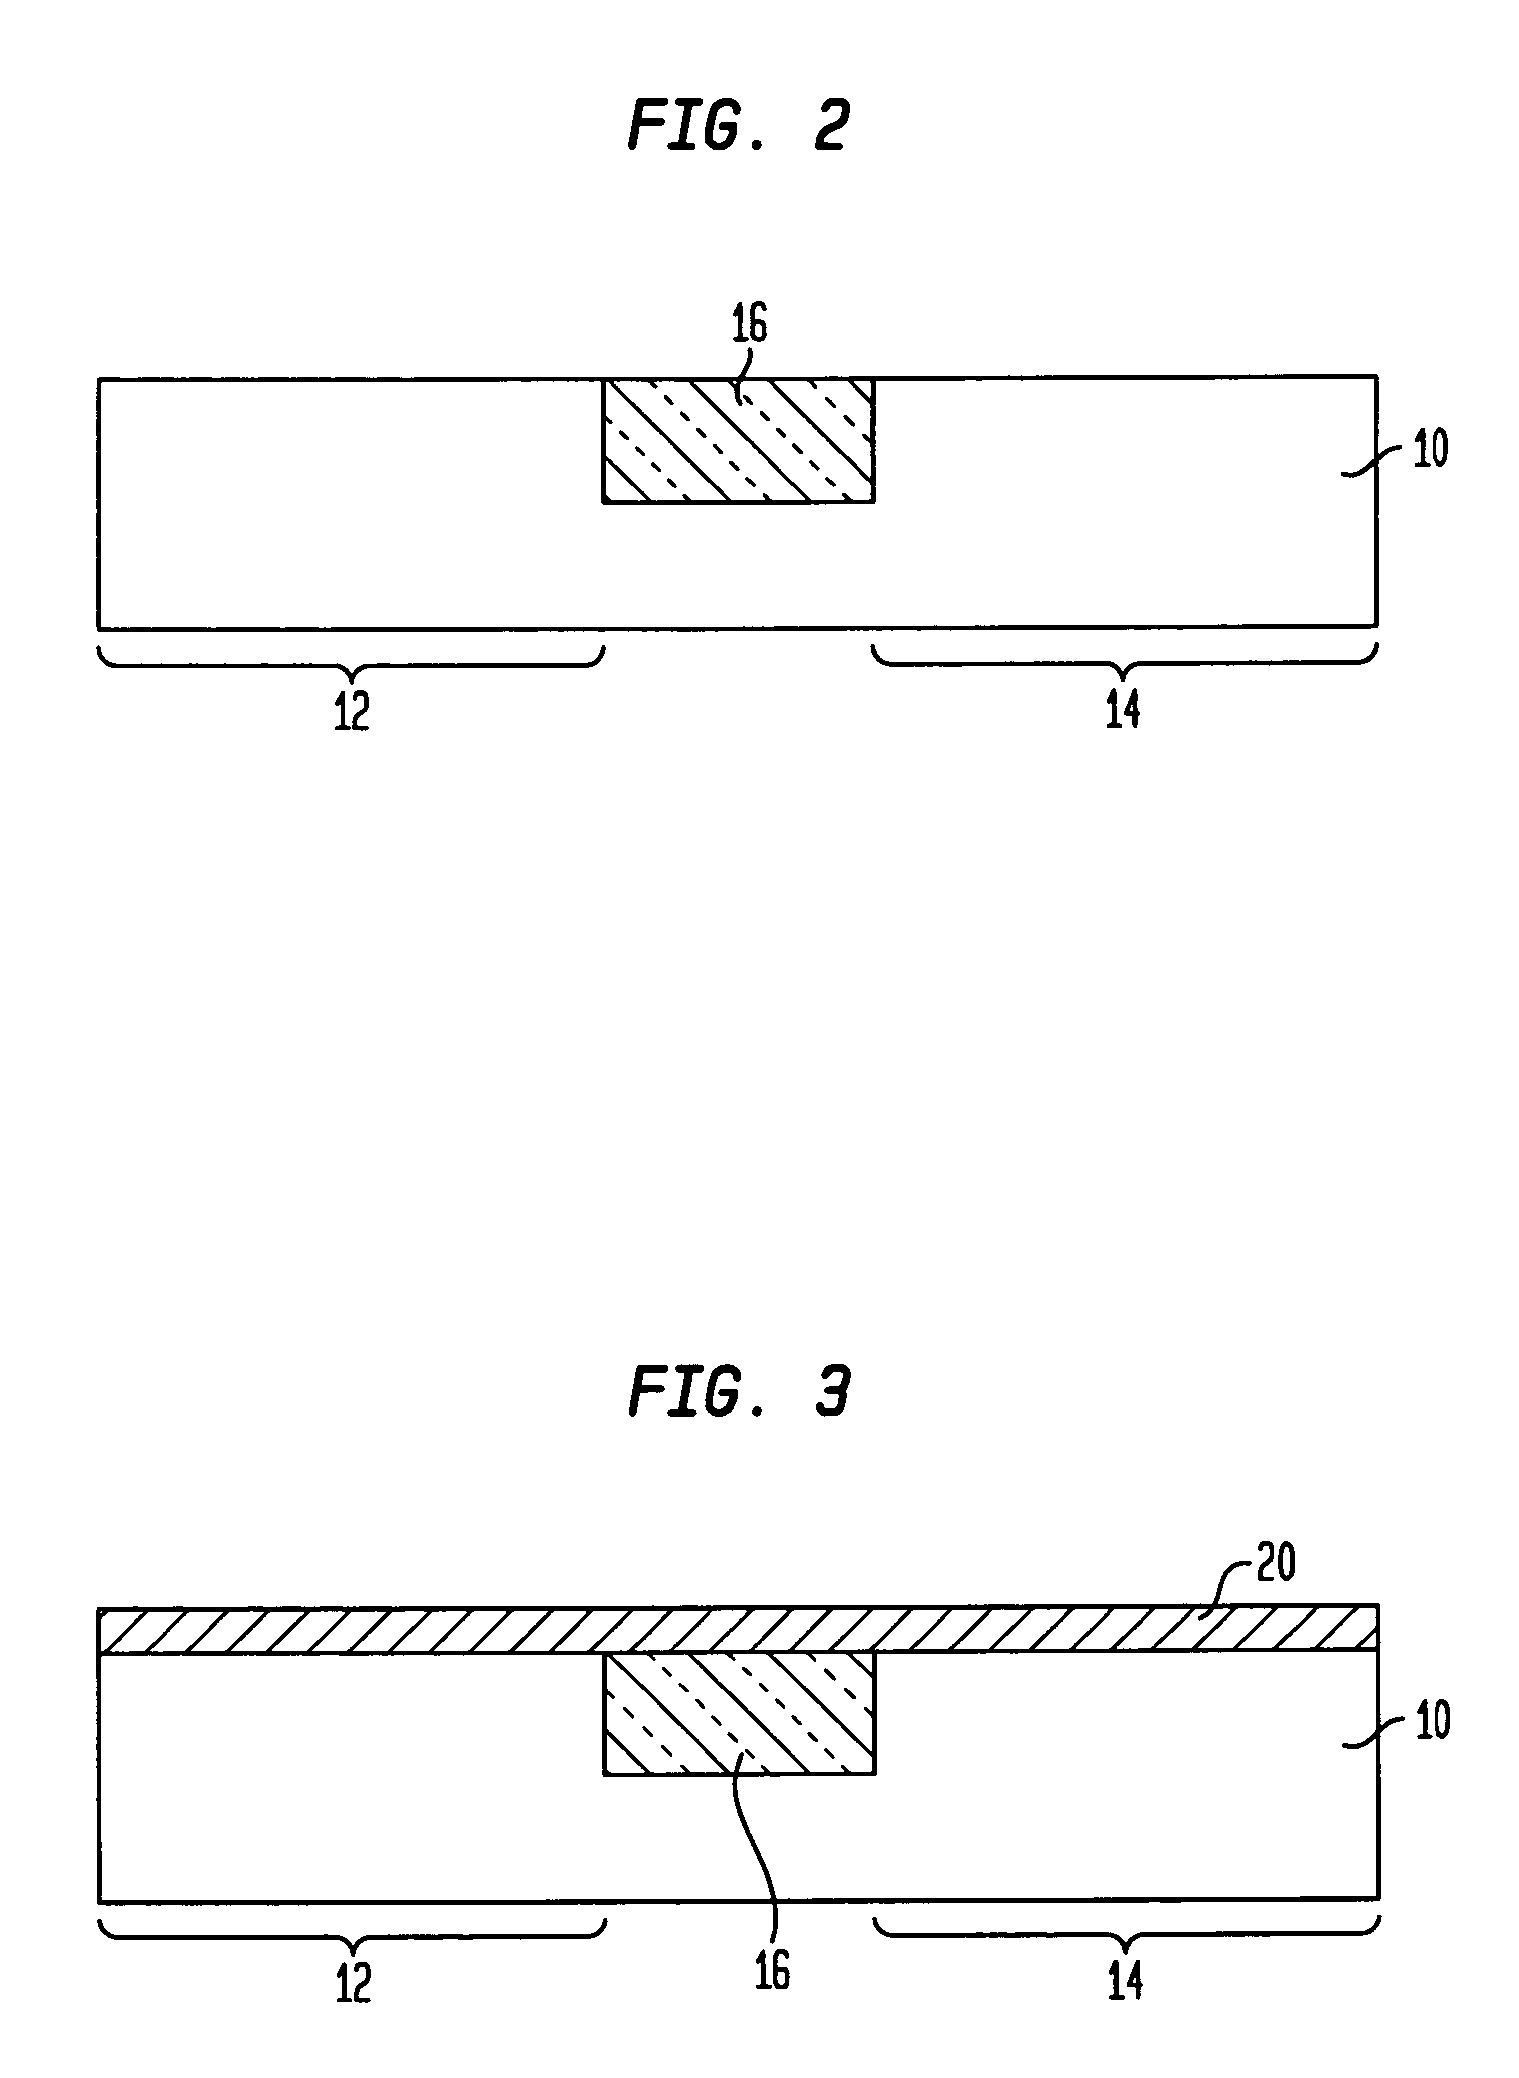 Method for forming self-aligned metal silicide contacts